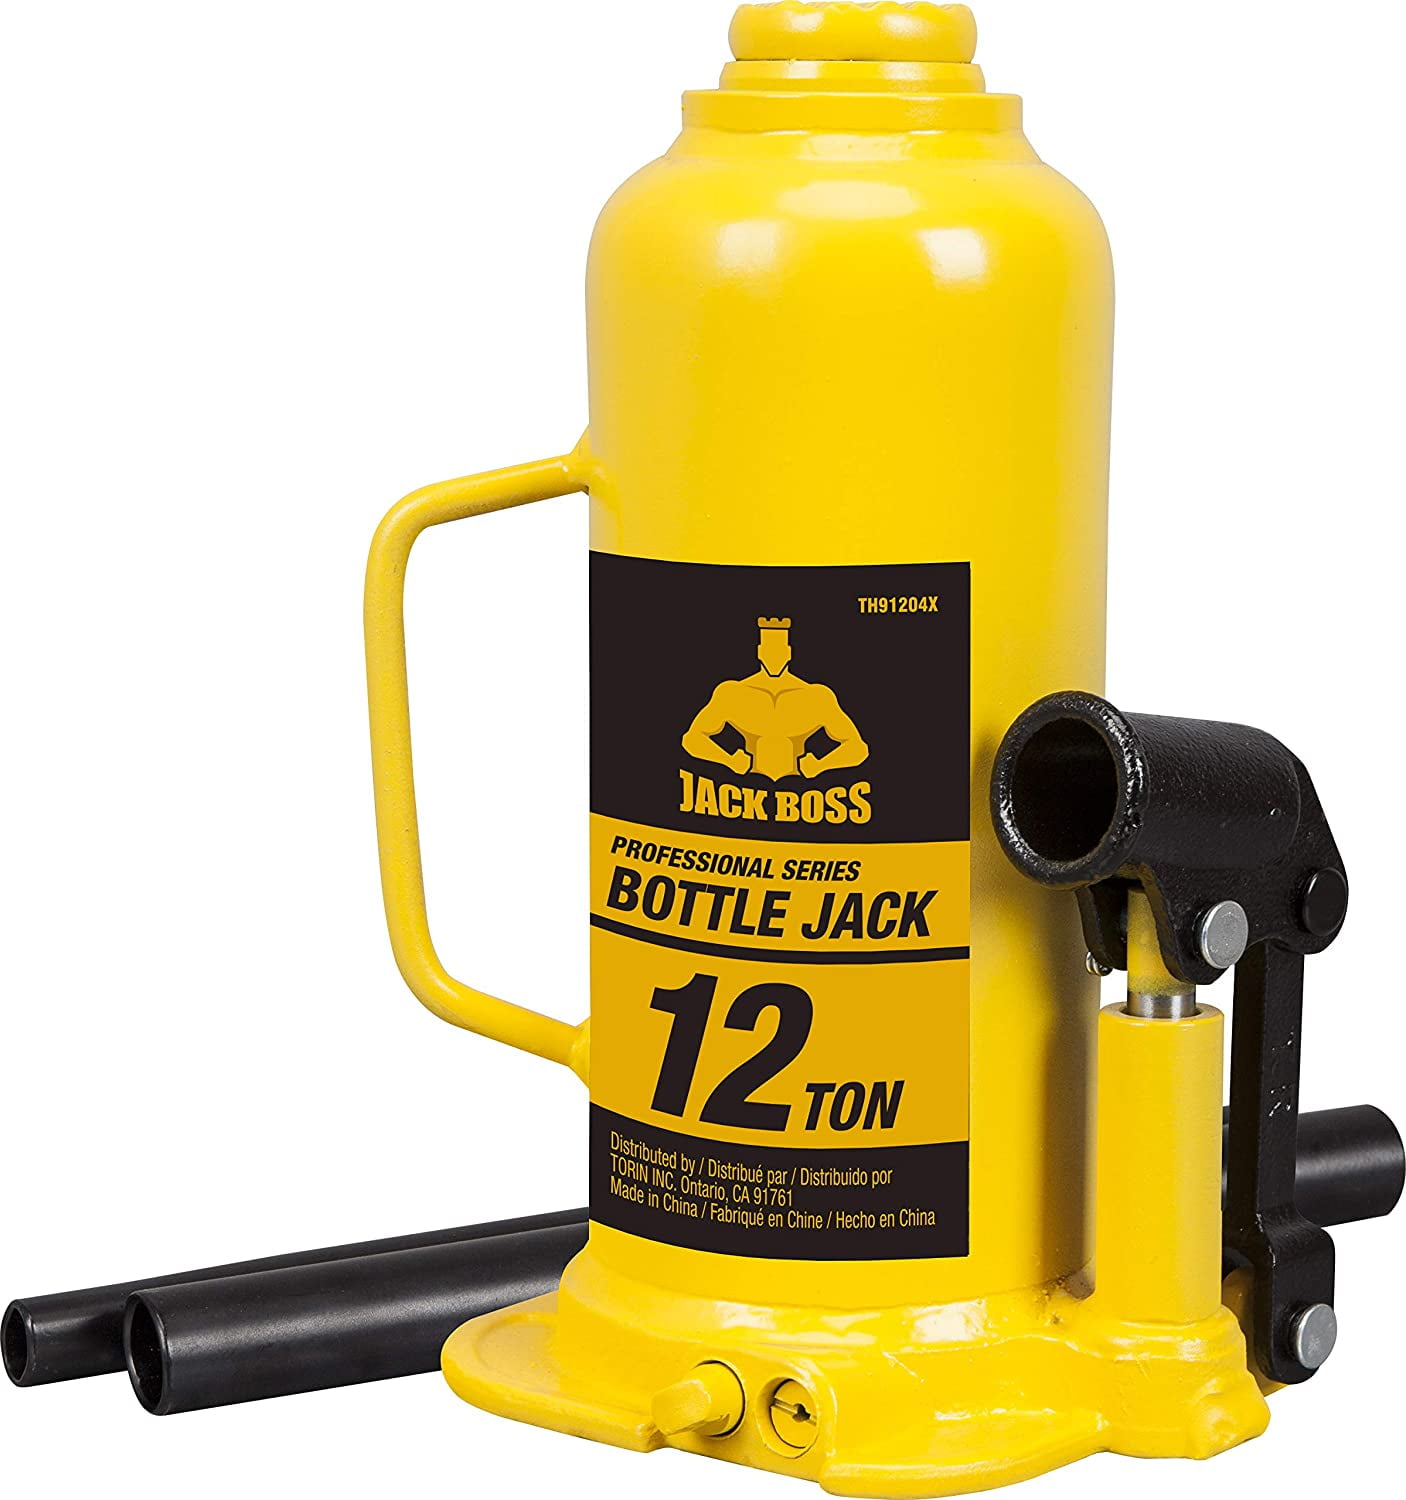 Forged and Welded Base High-Grade Steel Construction AFF Super Duty 12 Ton Hydraulic Bottle Jack Welded Cylinder 3612 Manual 